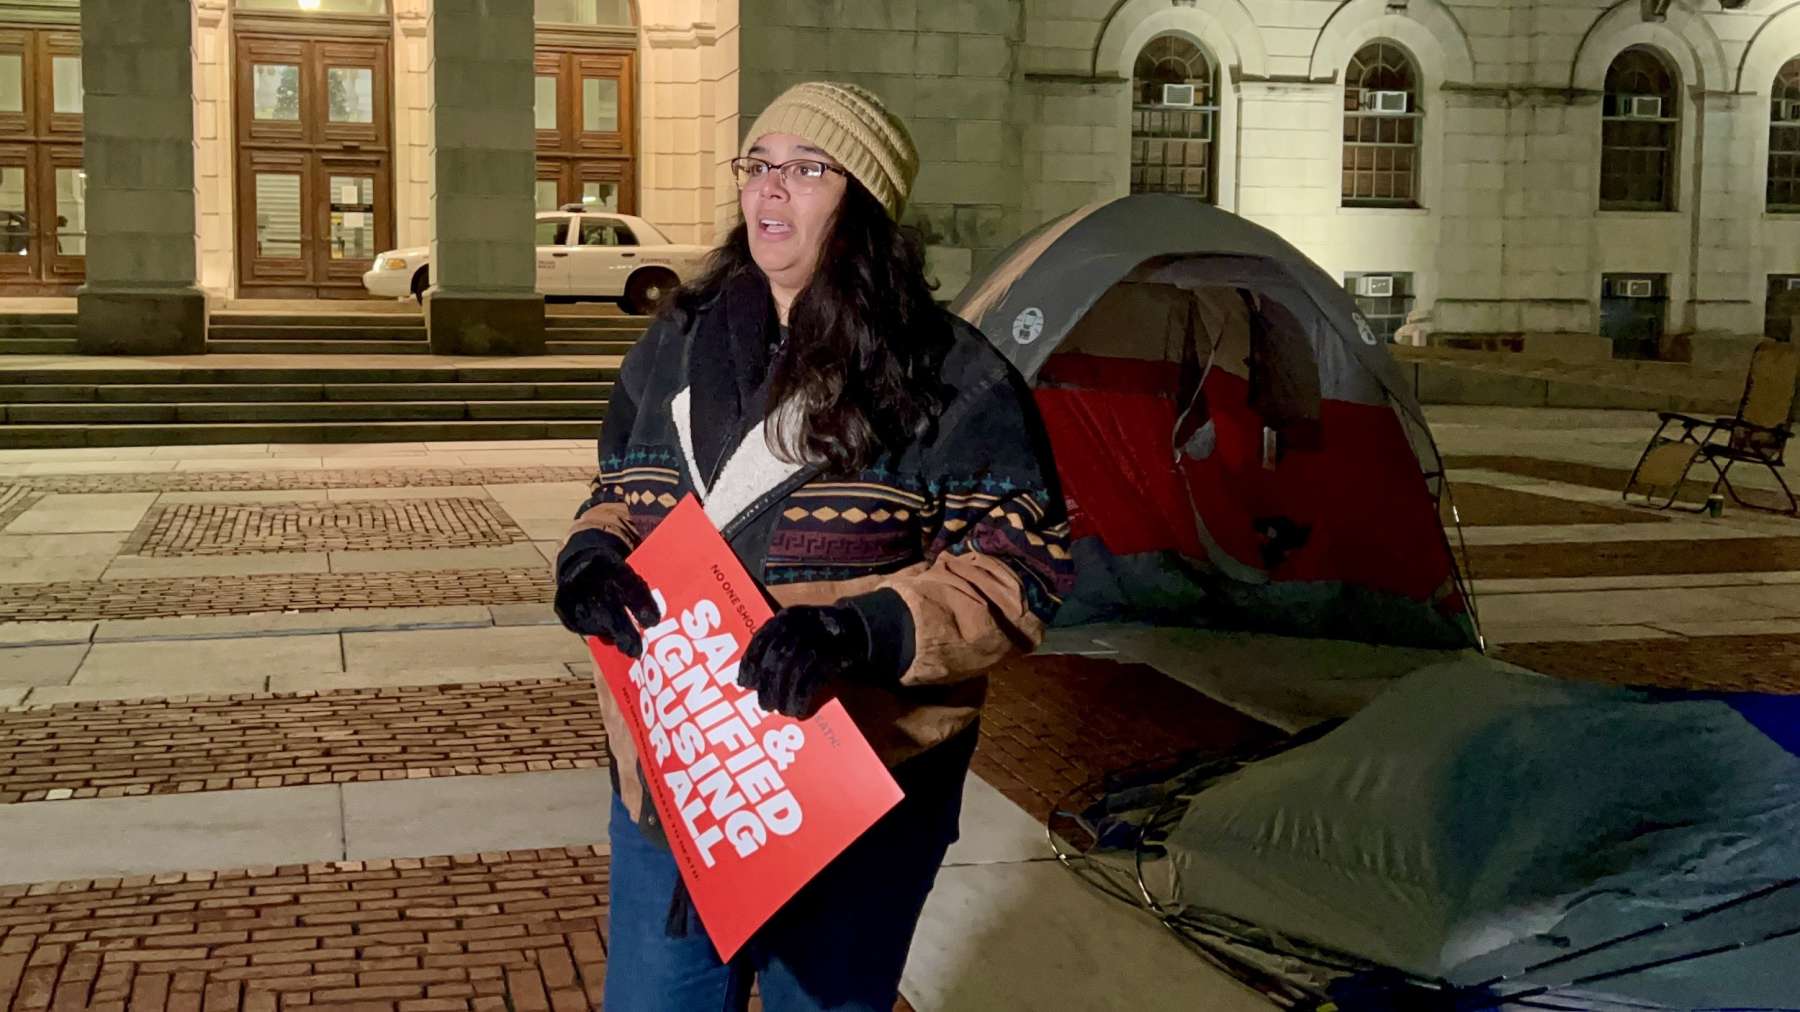 Senator Mendes to sleep in a tent outside State House until leadership acts on homelessness crisis